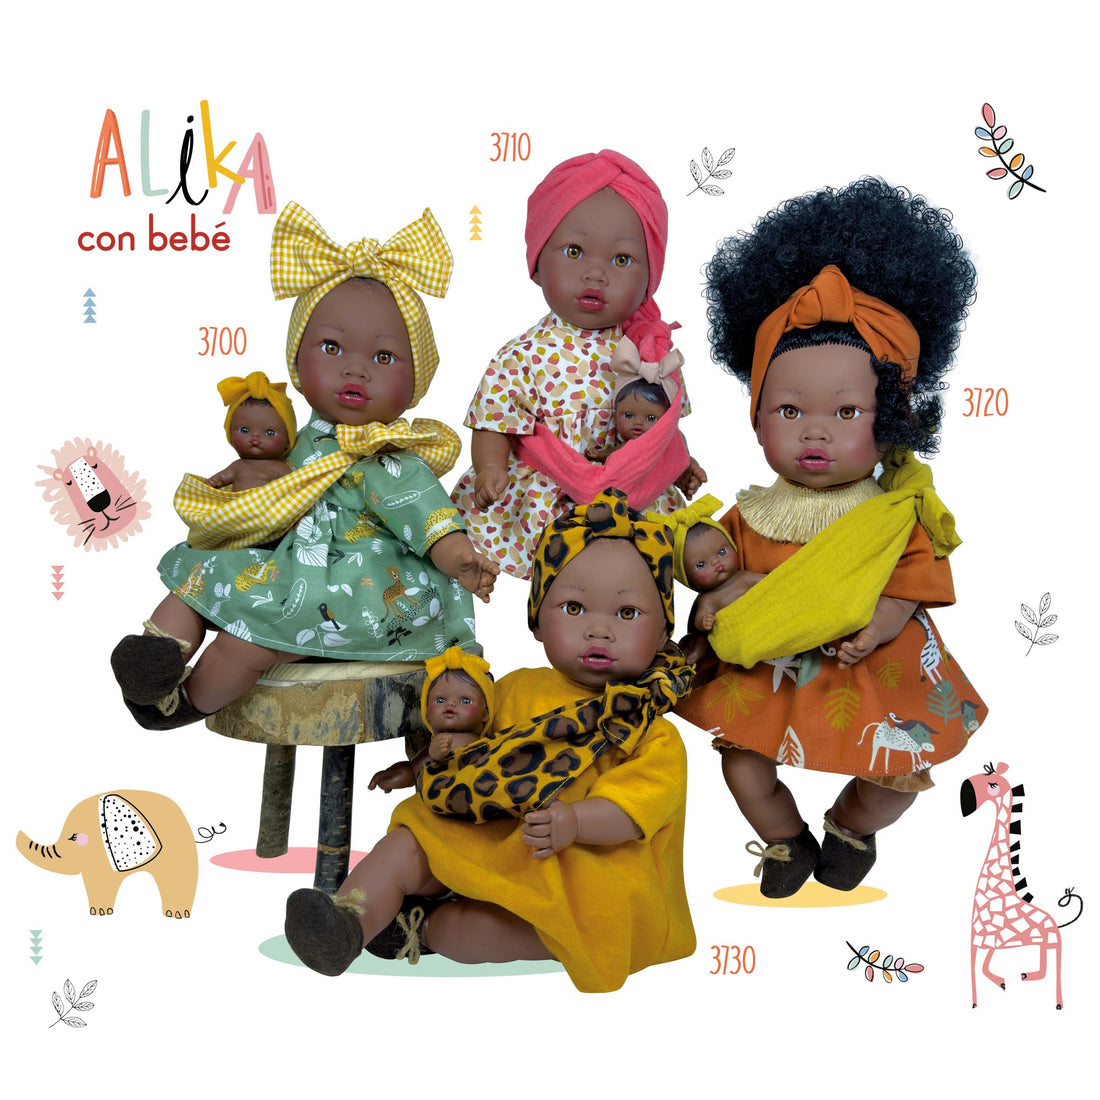 Handcrafted Alika Doll with Baby (3730) by Nines d&